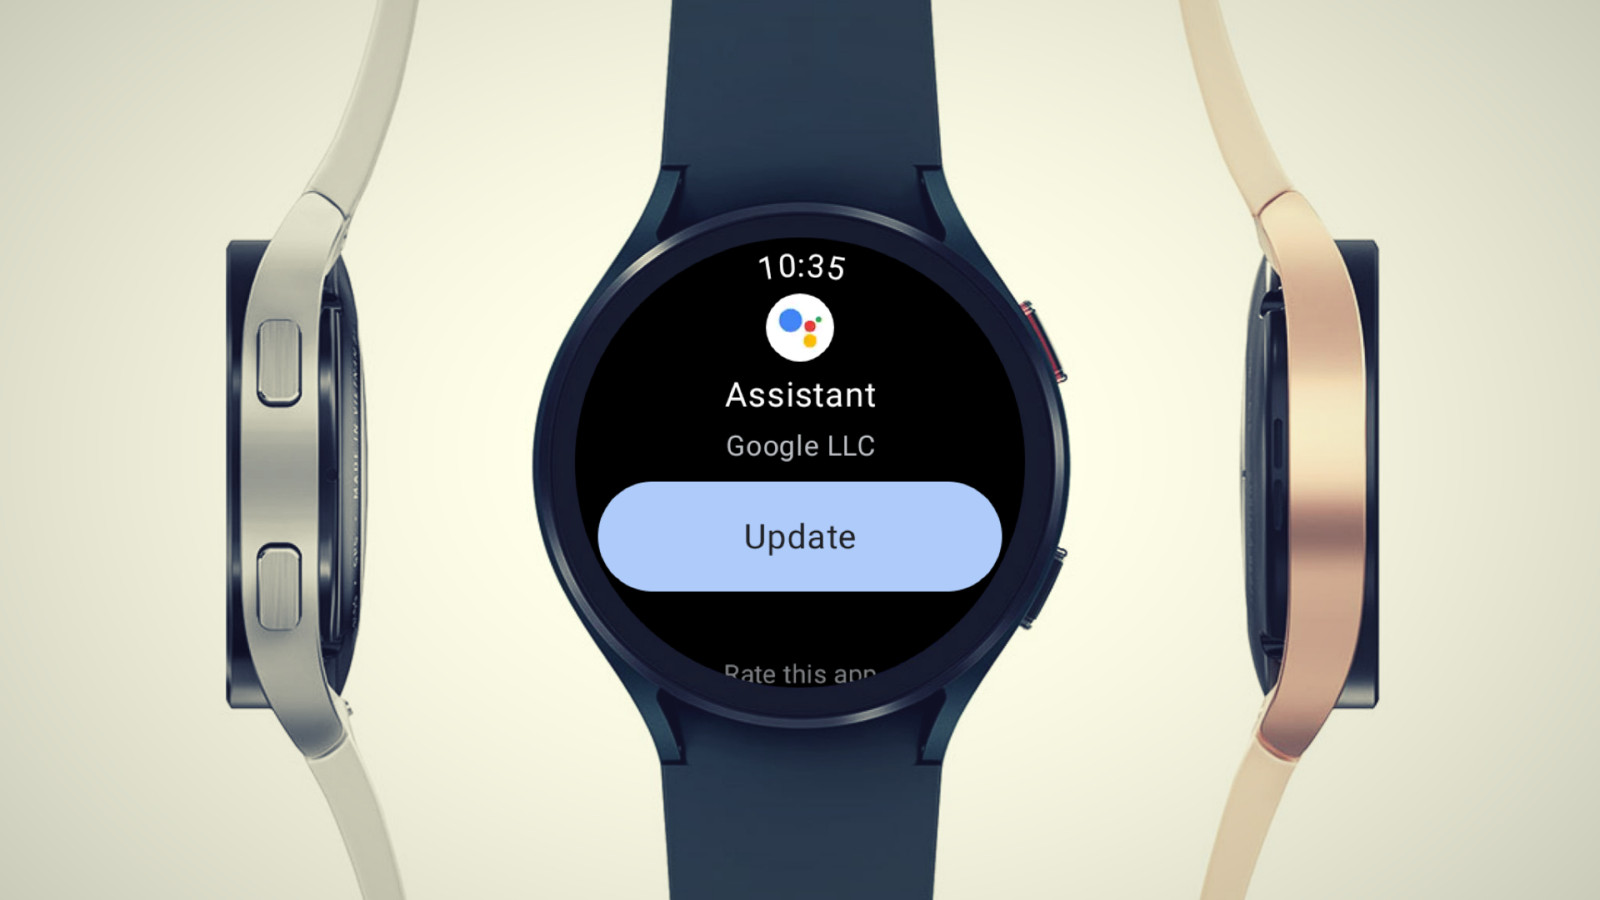 Google Assistant APK Download for Galaxy Watch 4 and all Wear OS devices